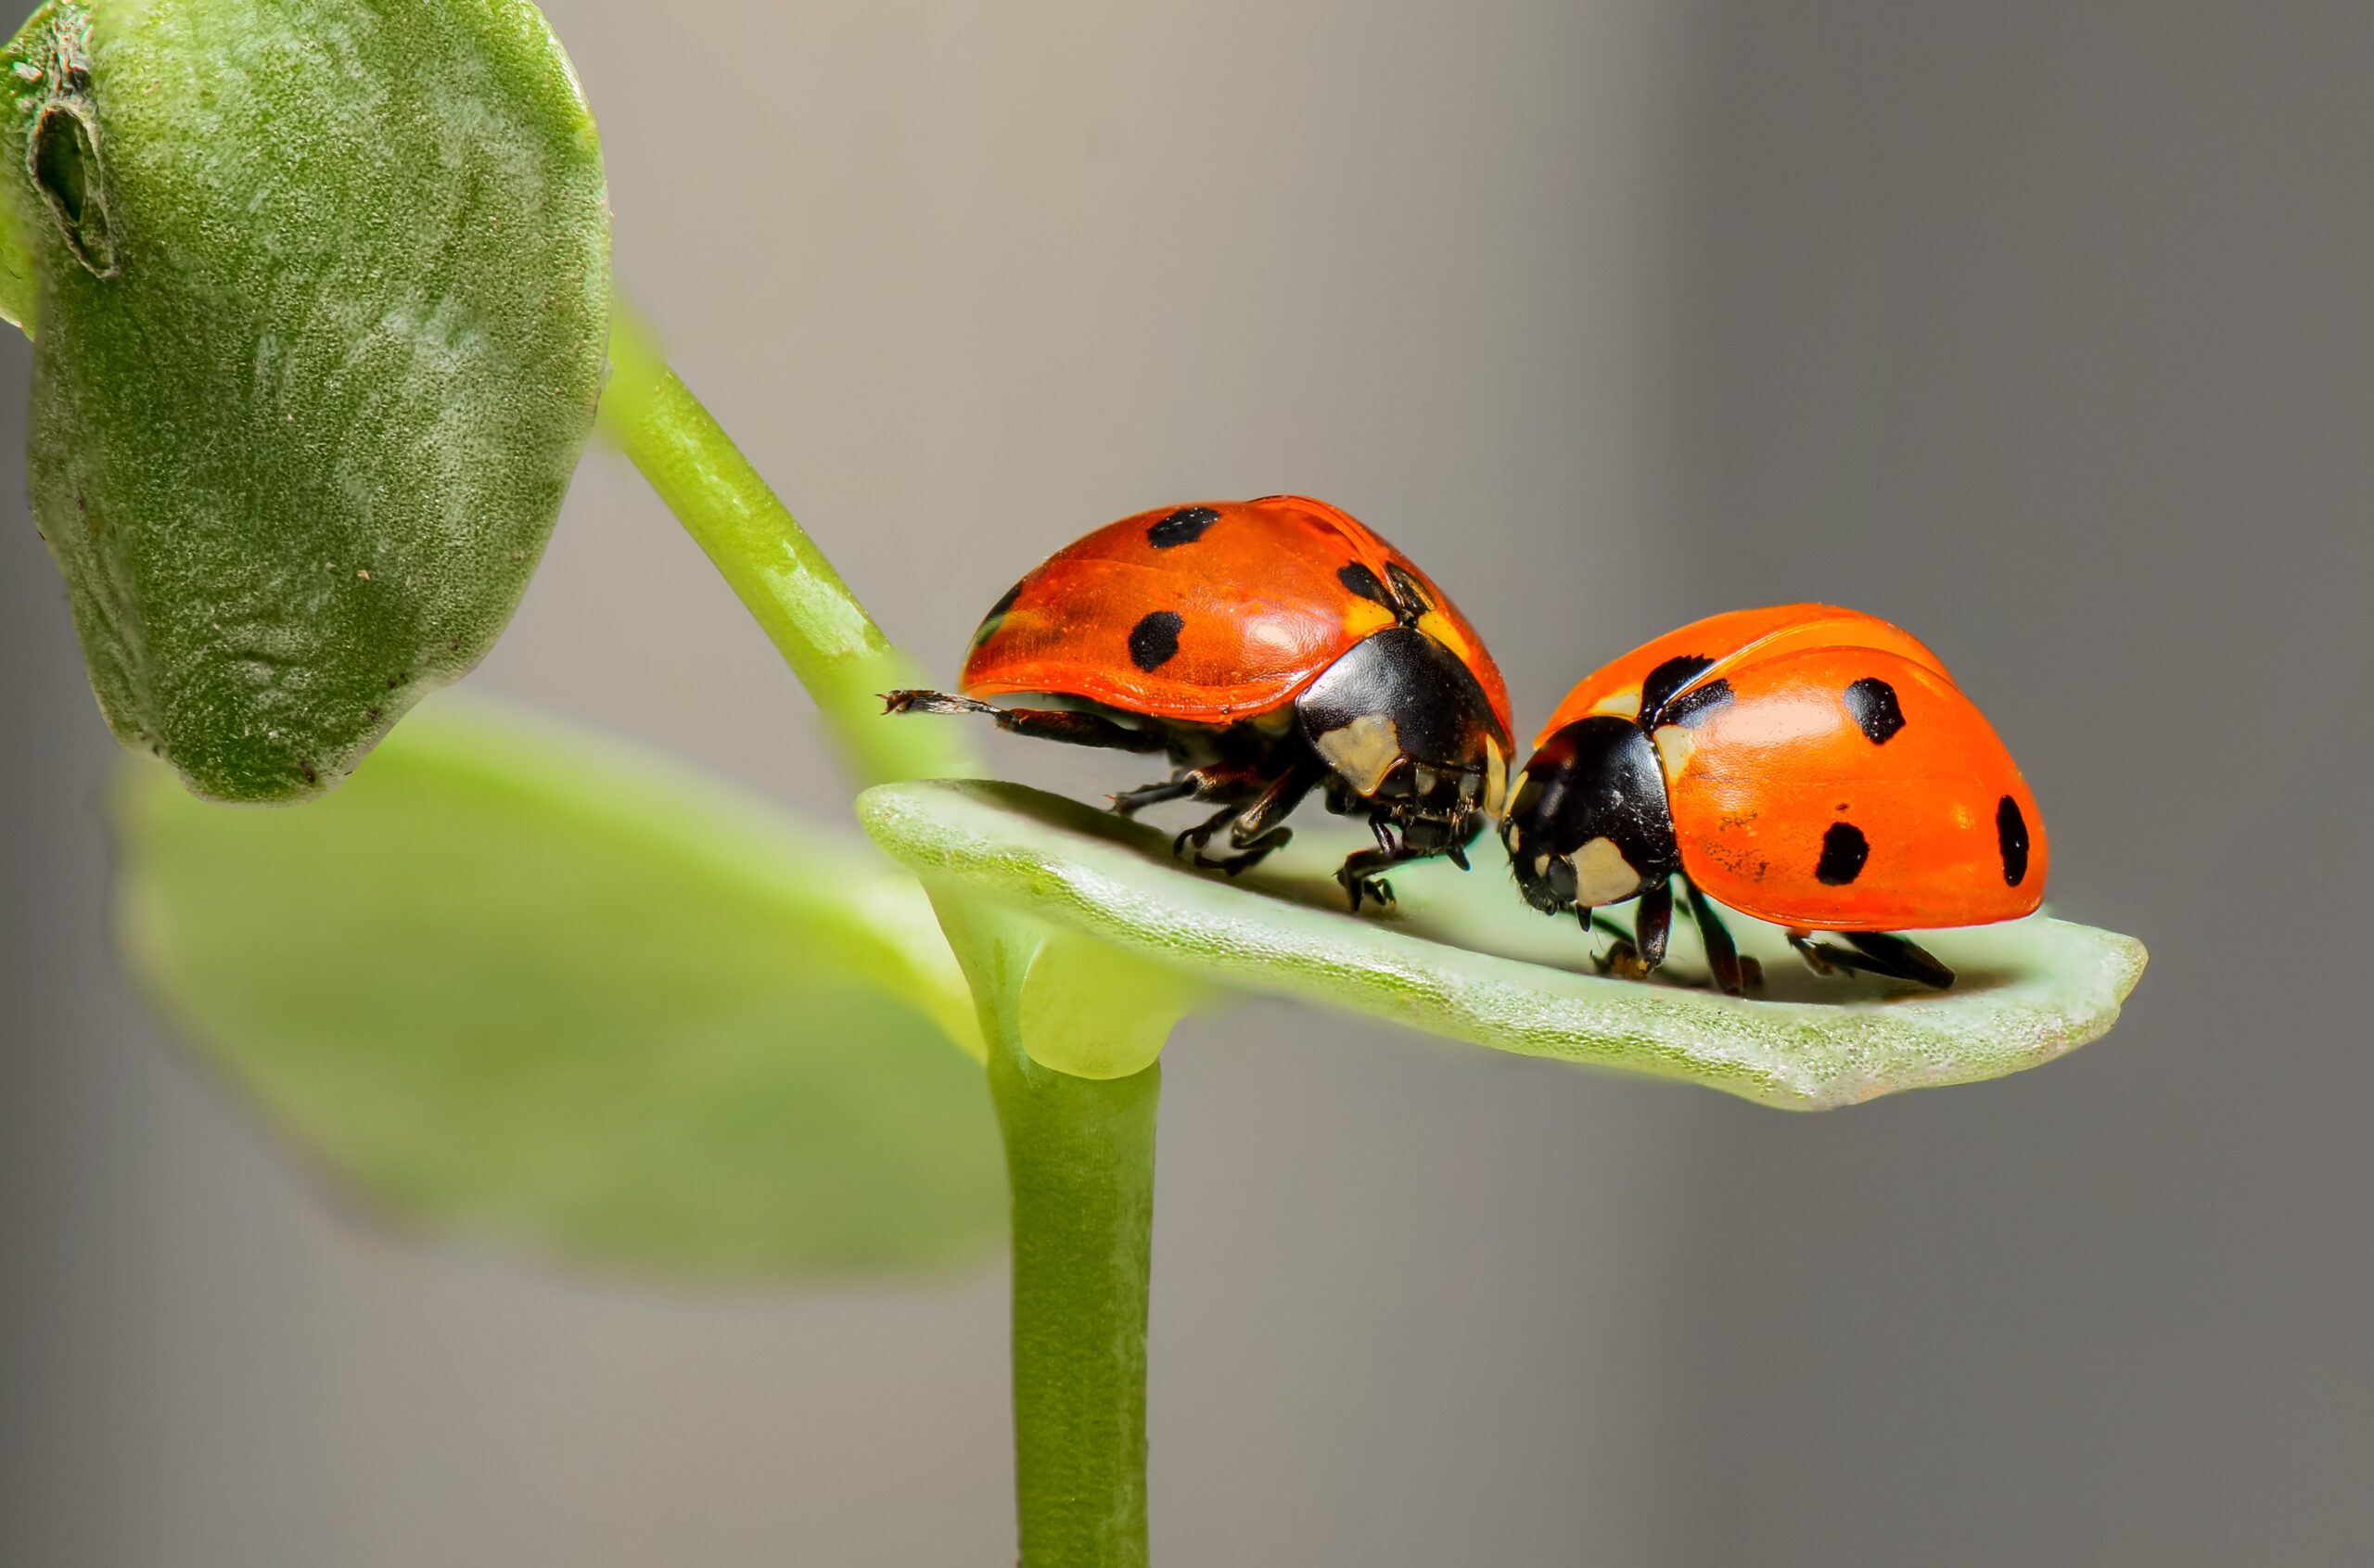 Adding plants that will attract ladybugs